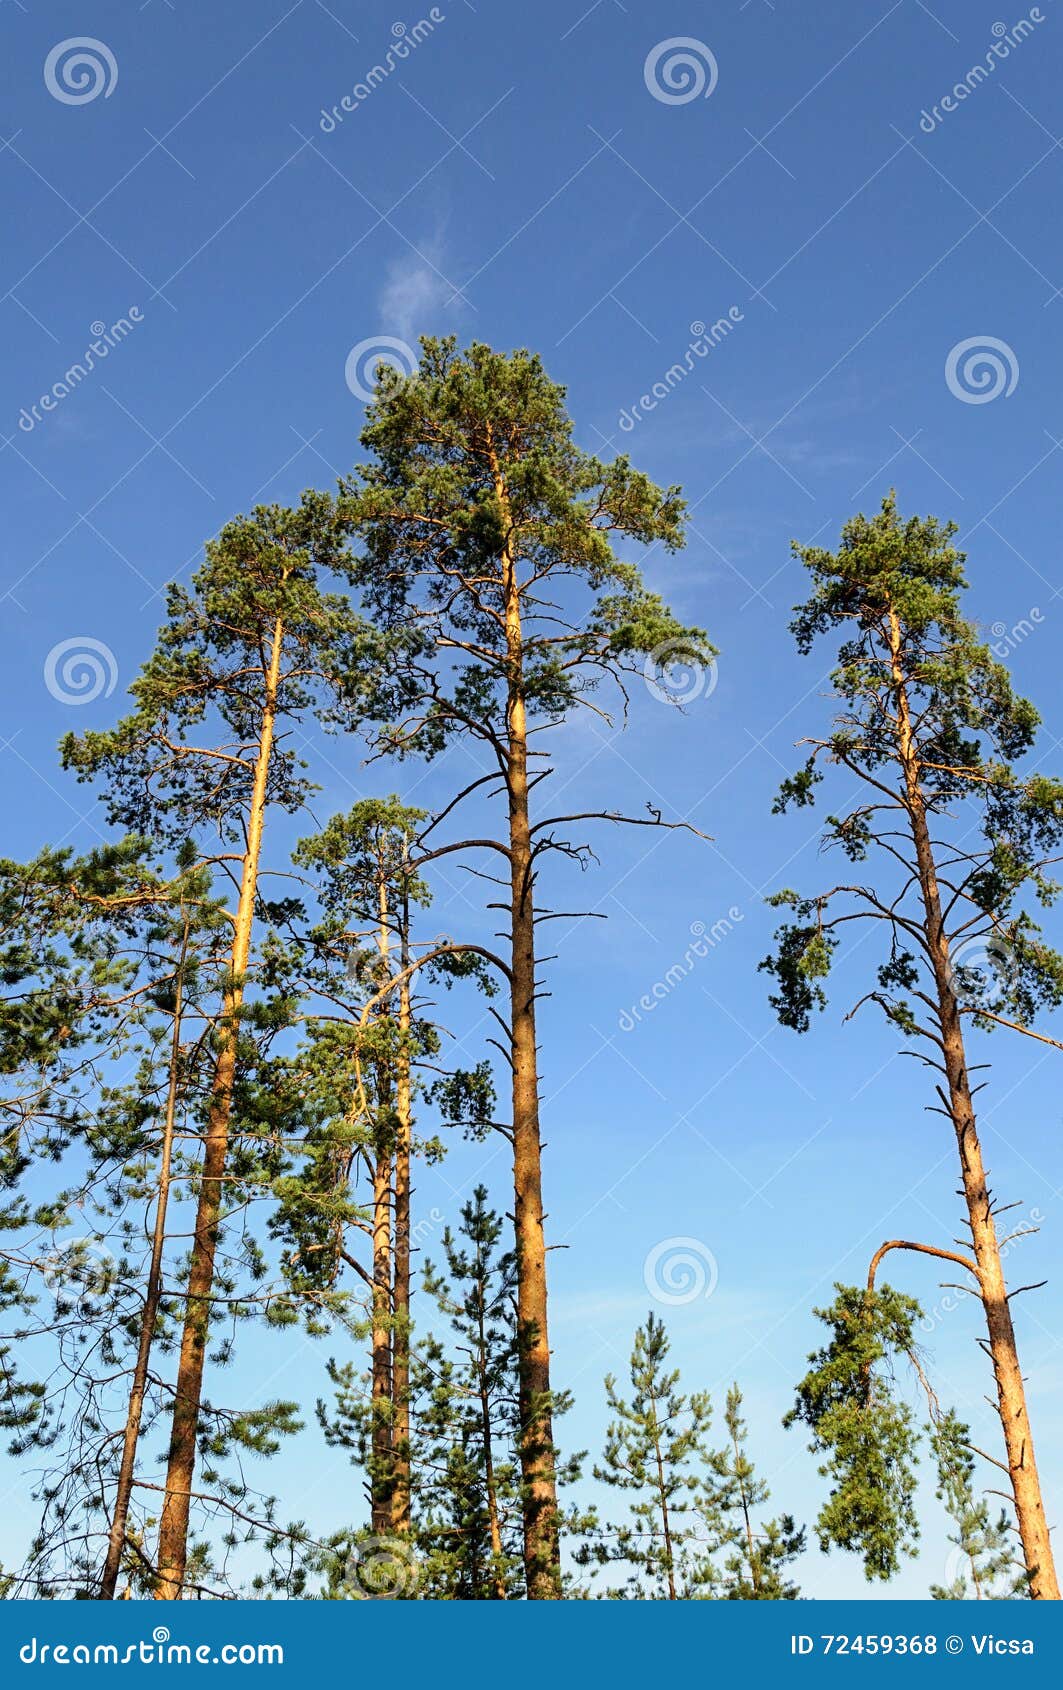 Tall thin pine trees stock photo. Image of blue, wilderness - 72459368